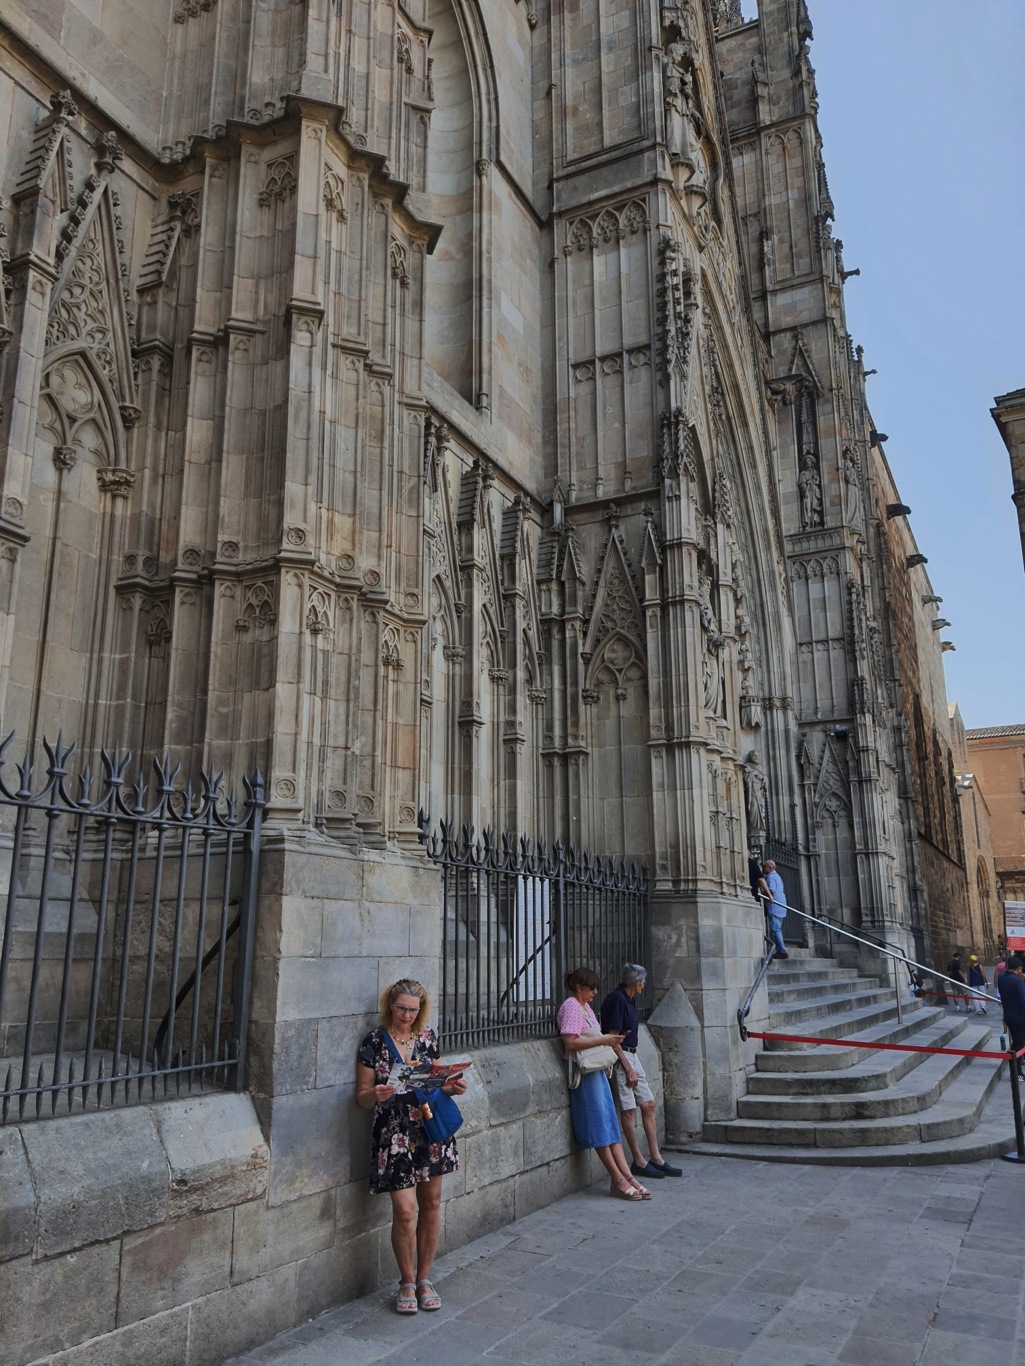 07-09-20-BarcelonaCathedral